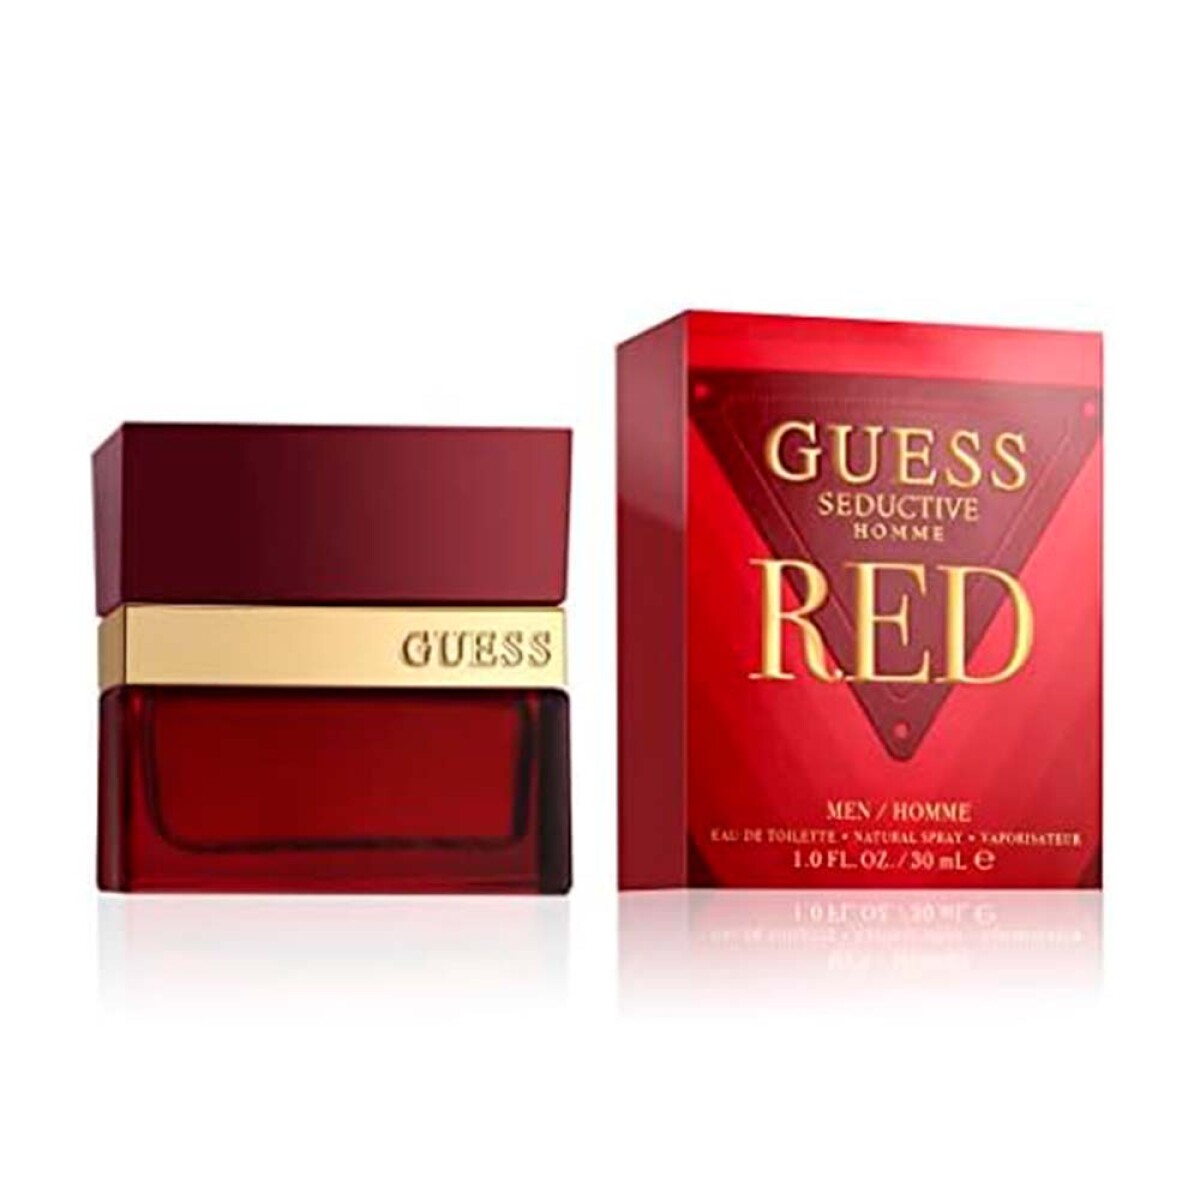 Perfume Guess Seductive Red For Men Edt 30ml 